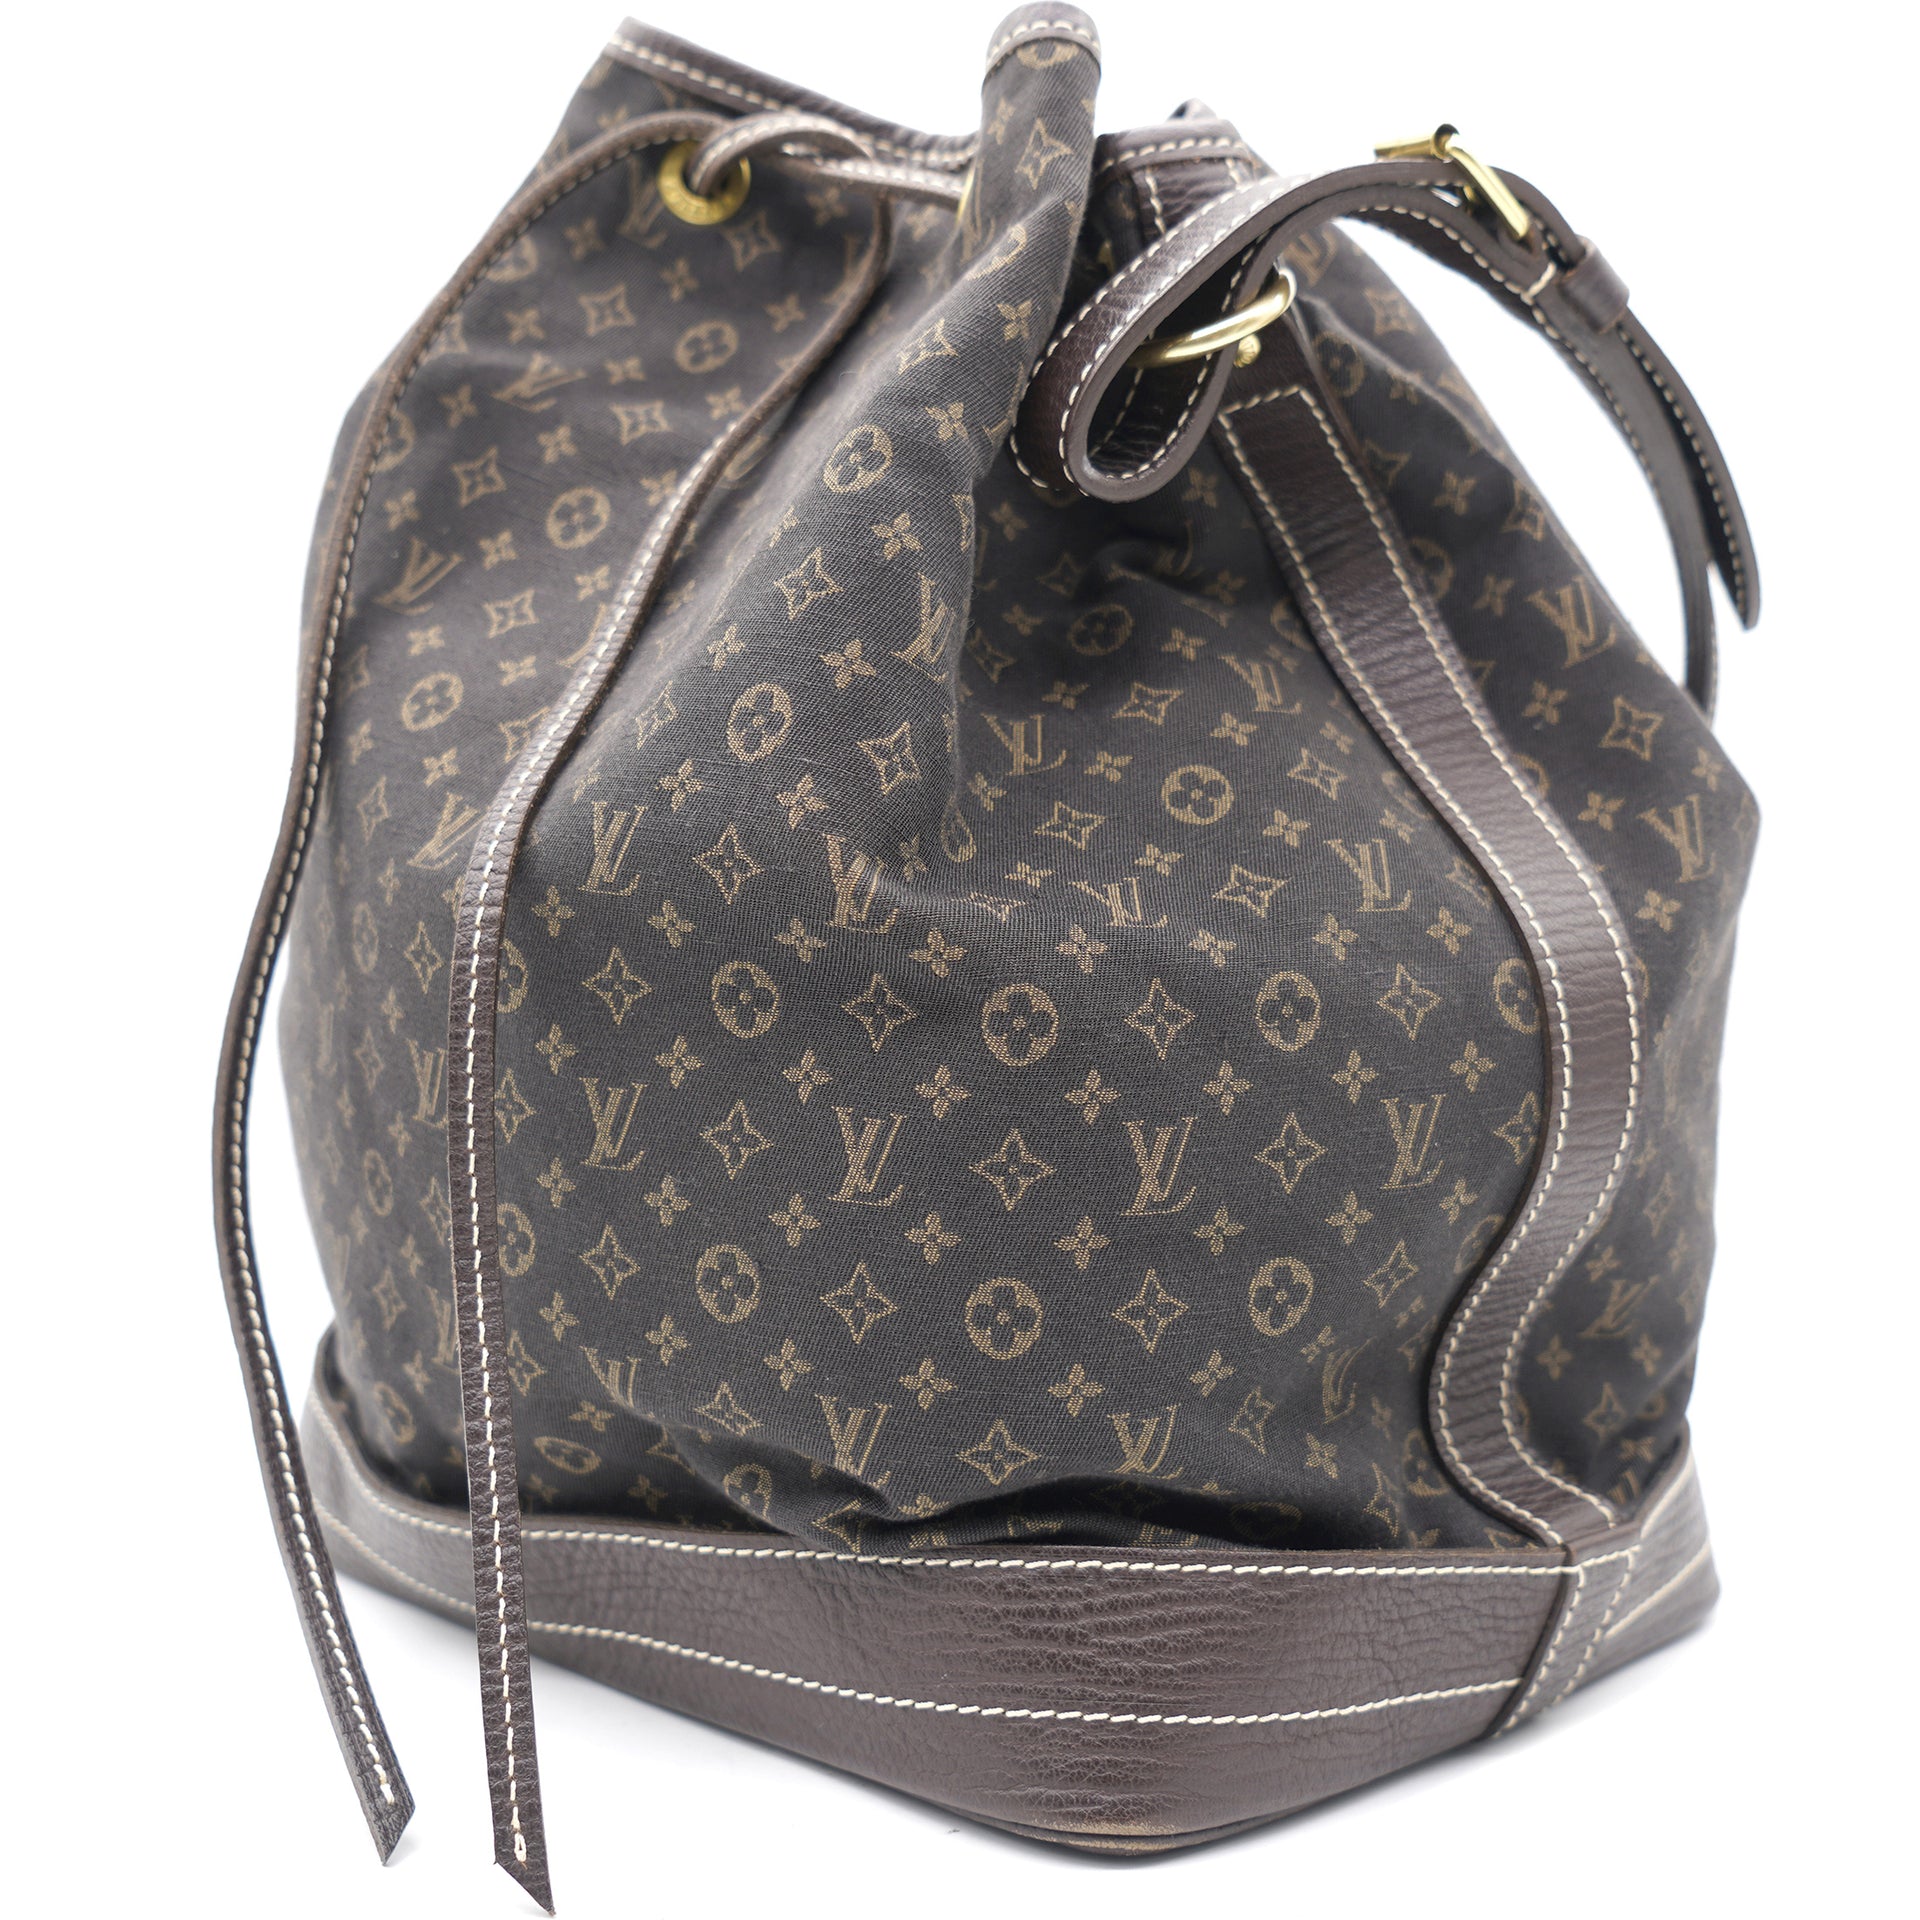 Bag and Purse Organizer with Regular Style for Louis Vuitton Noe Styles